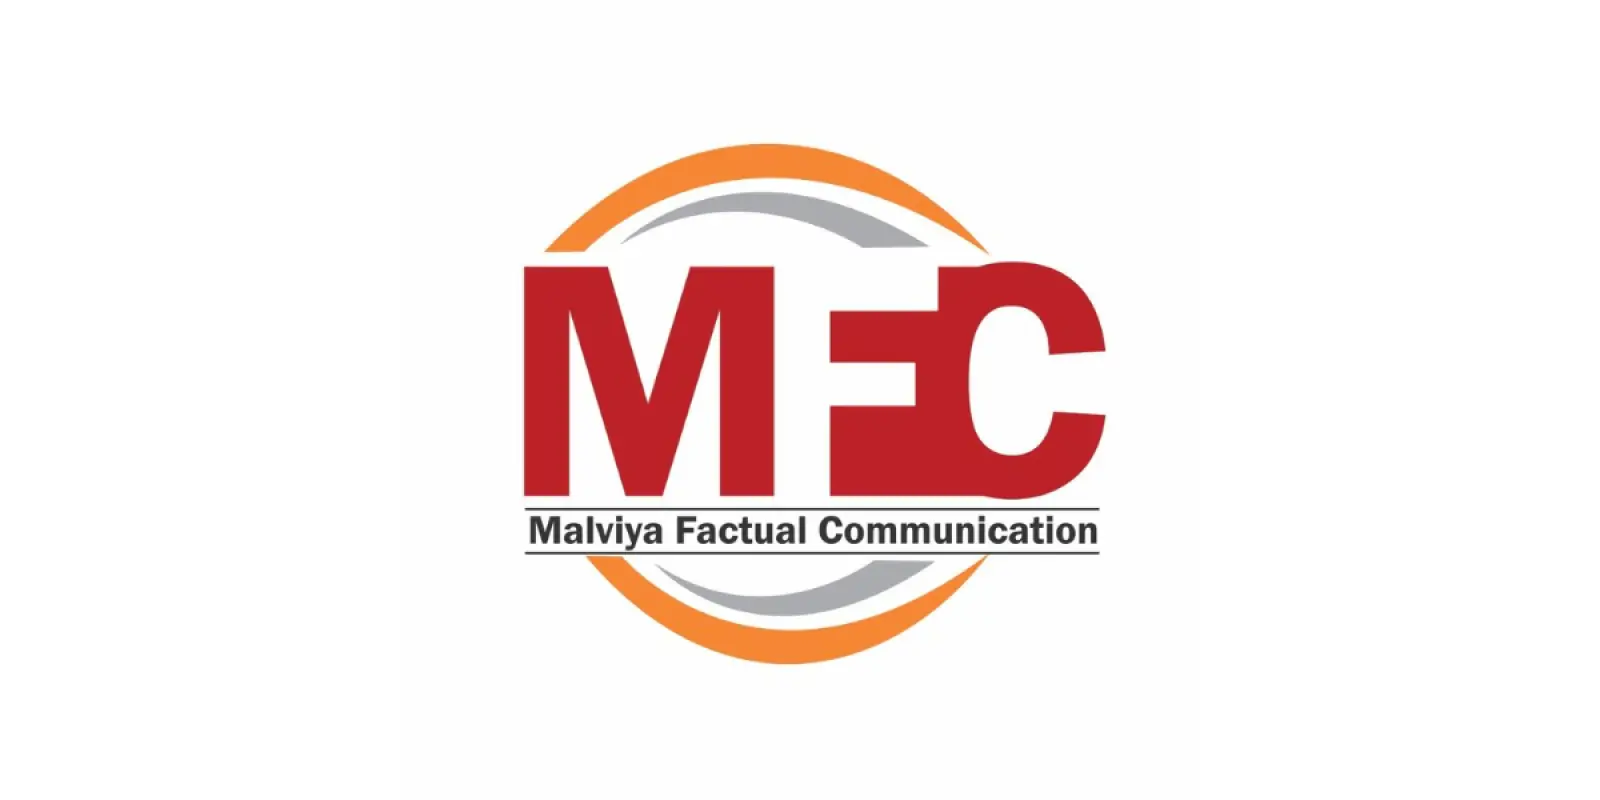 Malviya Factual Communication: Redefining the Synergy of Digital and Traditional PR in India